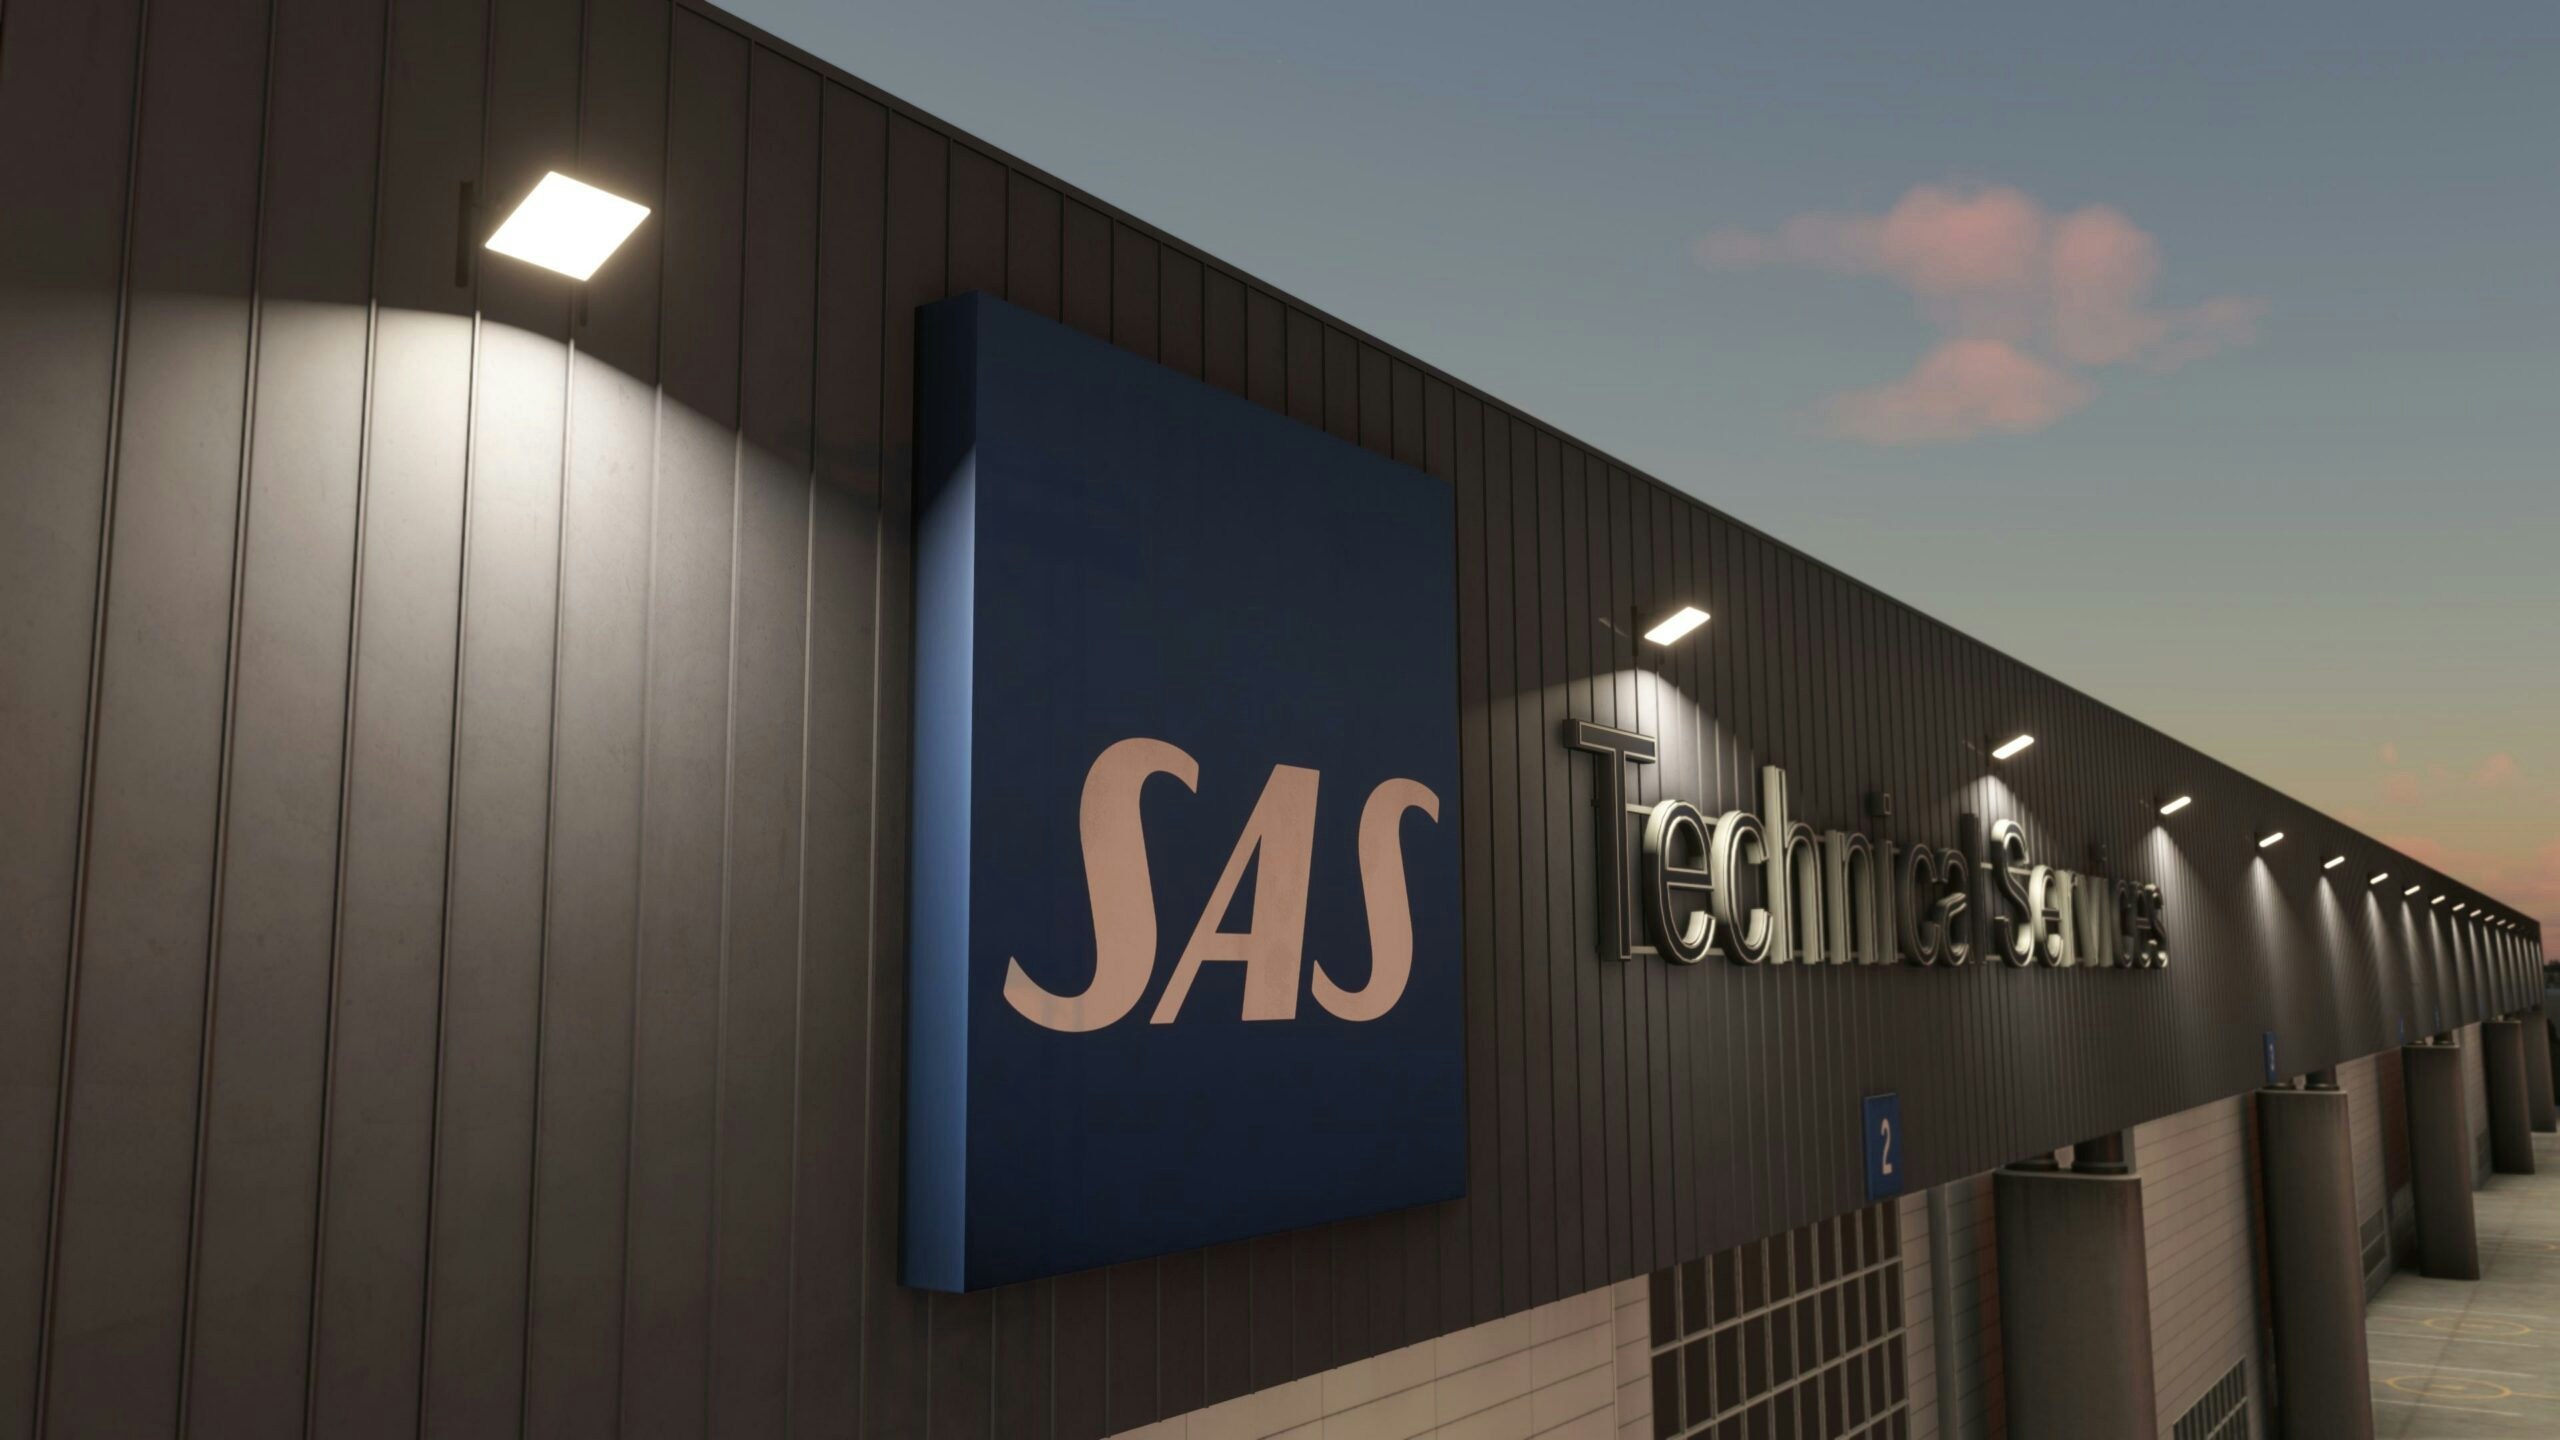 Aerosoft Previews Oslo Airport for MSFS